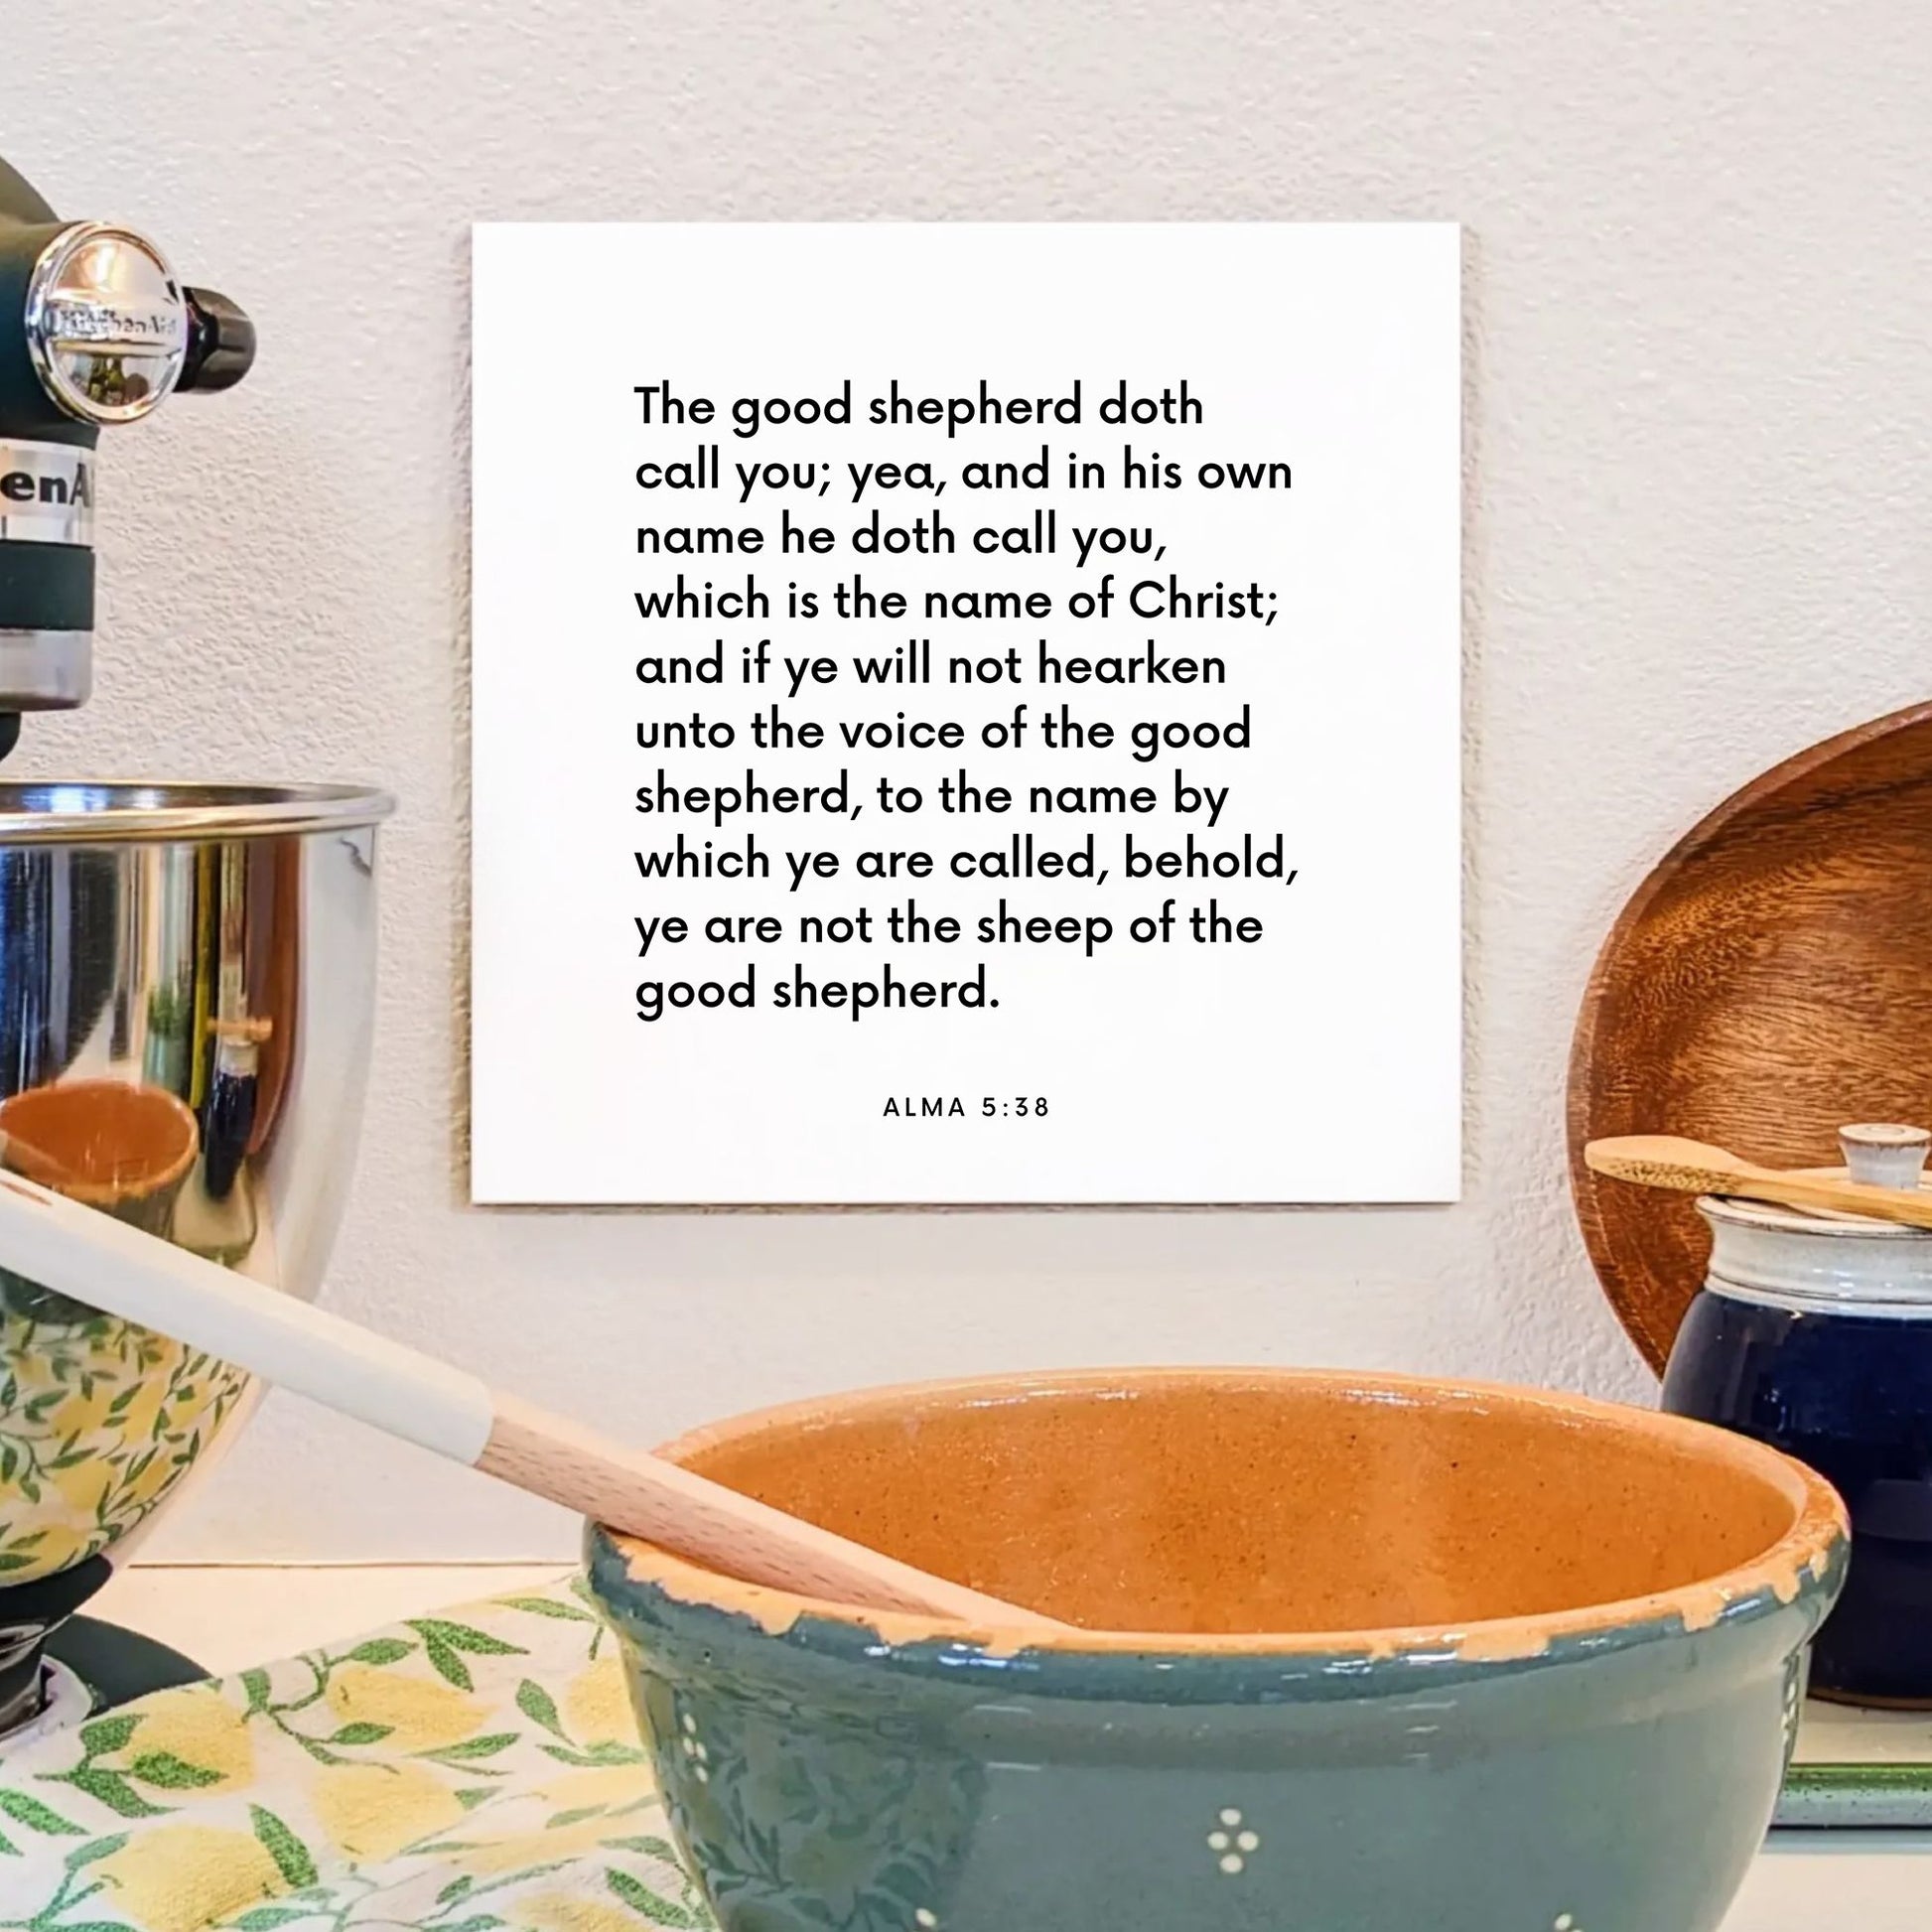 Kitchen mouting of the scripture tile for Alma 5:38 - "The good shepherd doth call you"